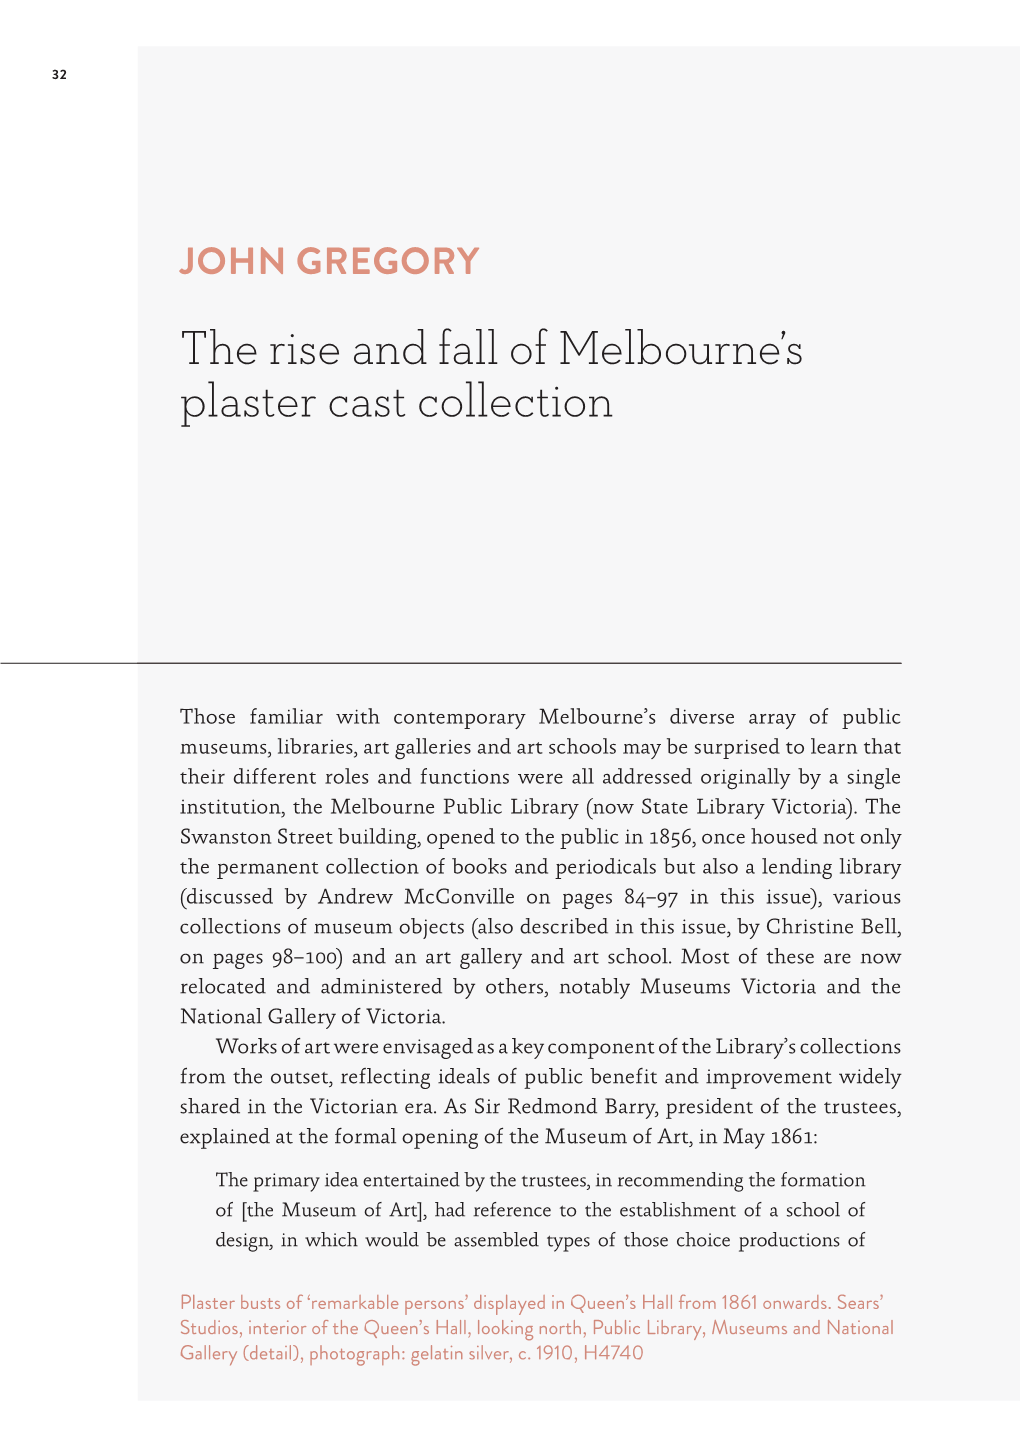 The Rise and Fall of Melbourne's Plaster Cast Collection